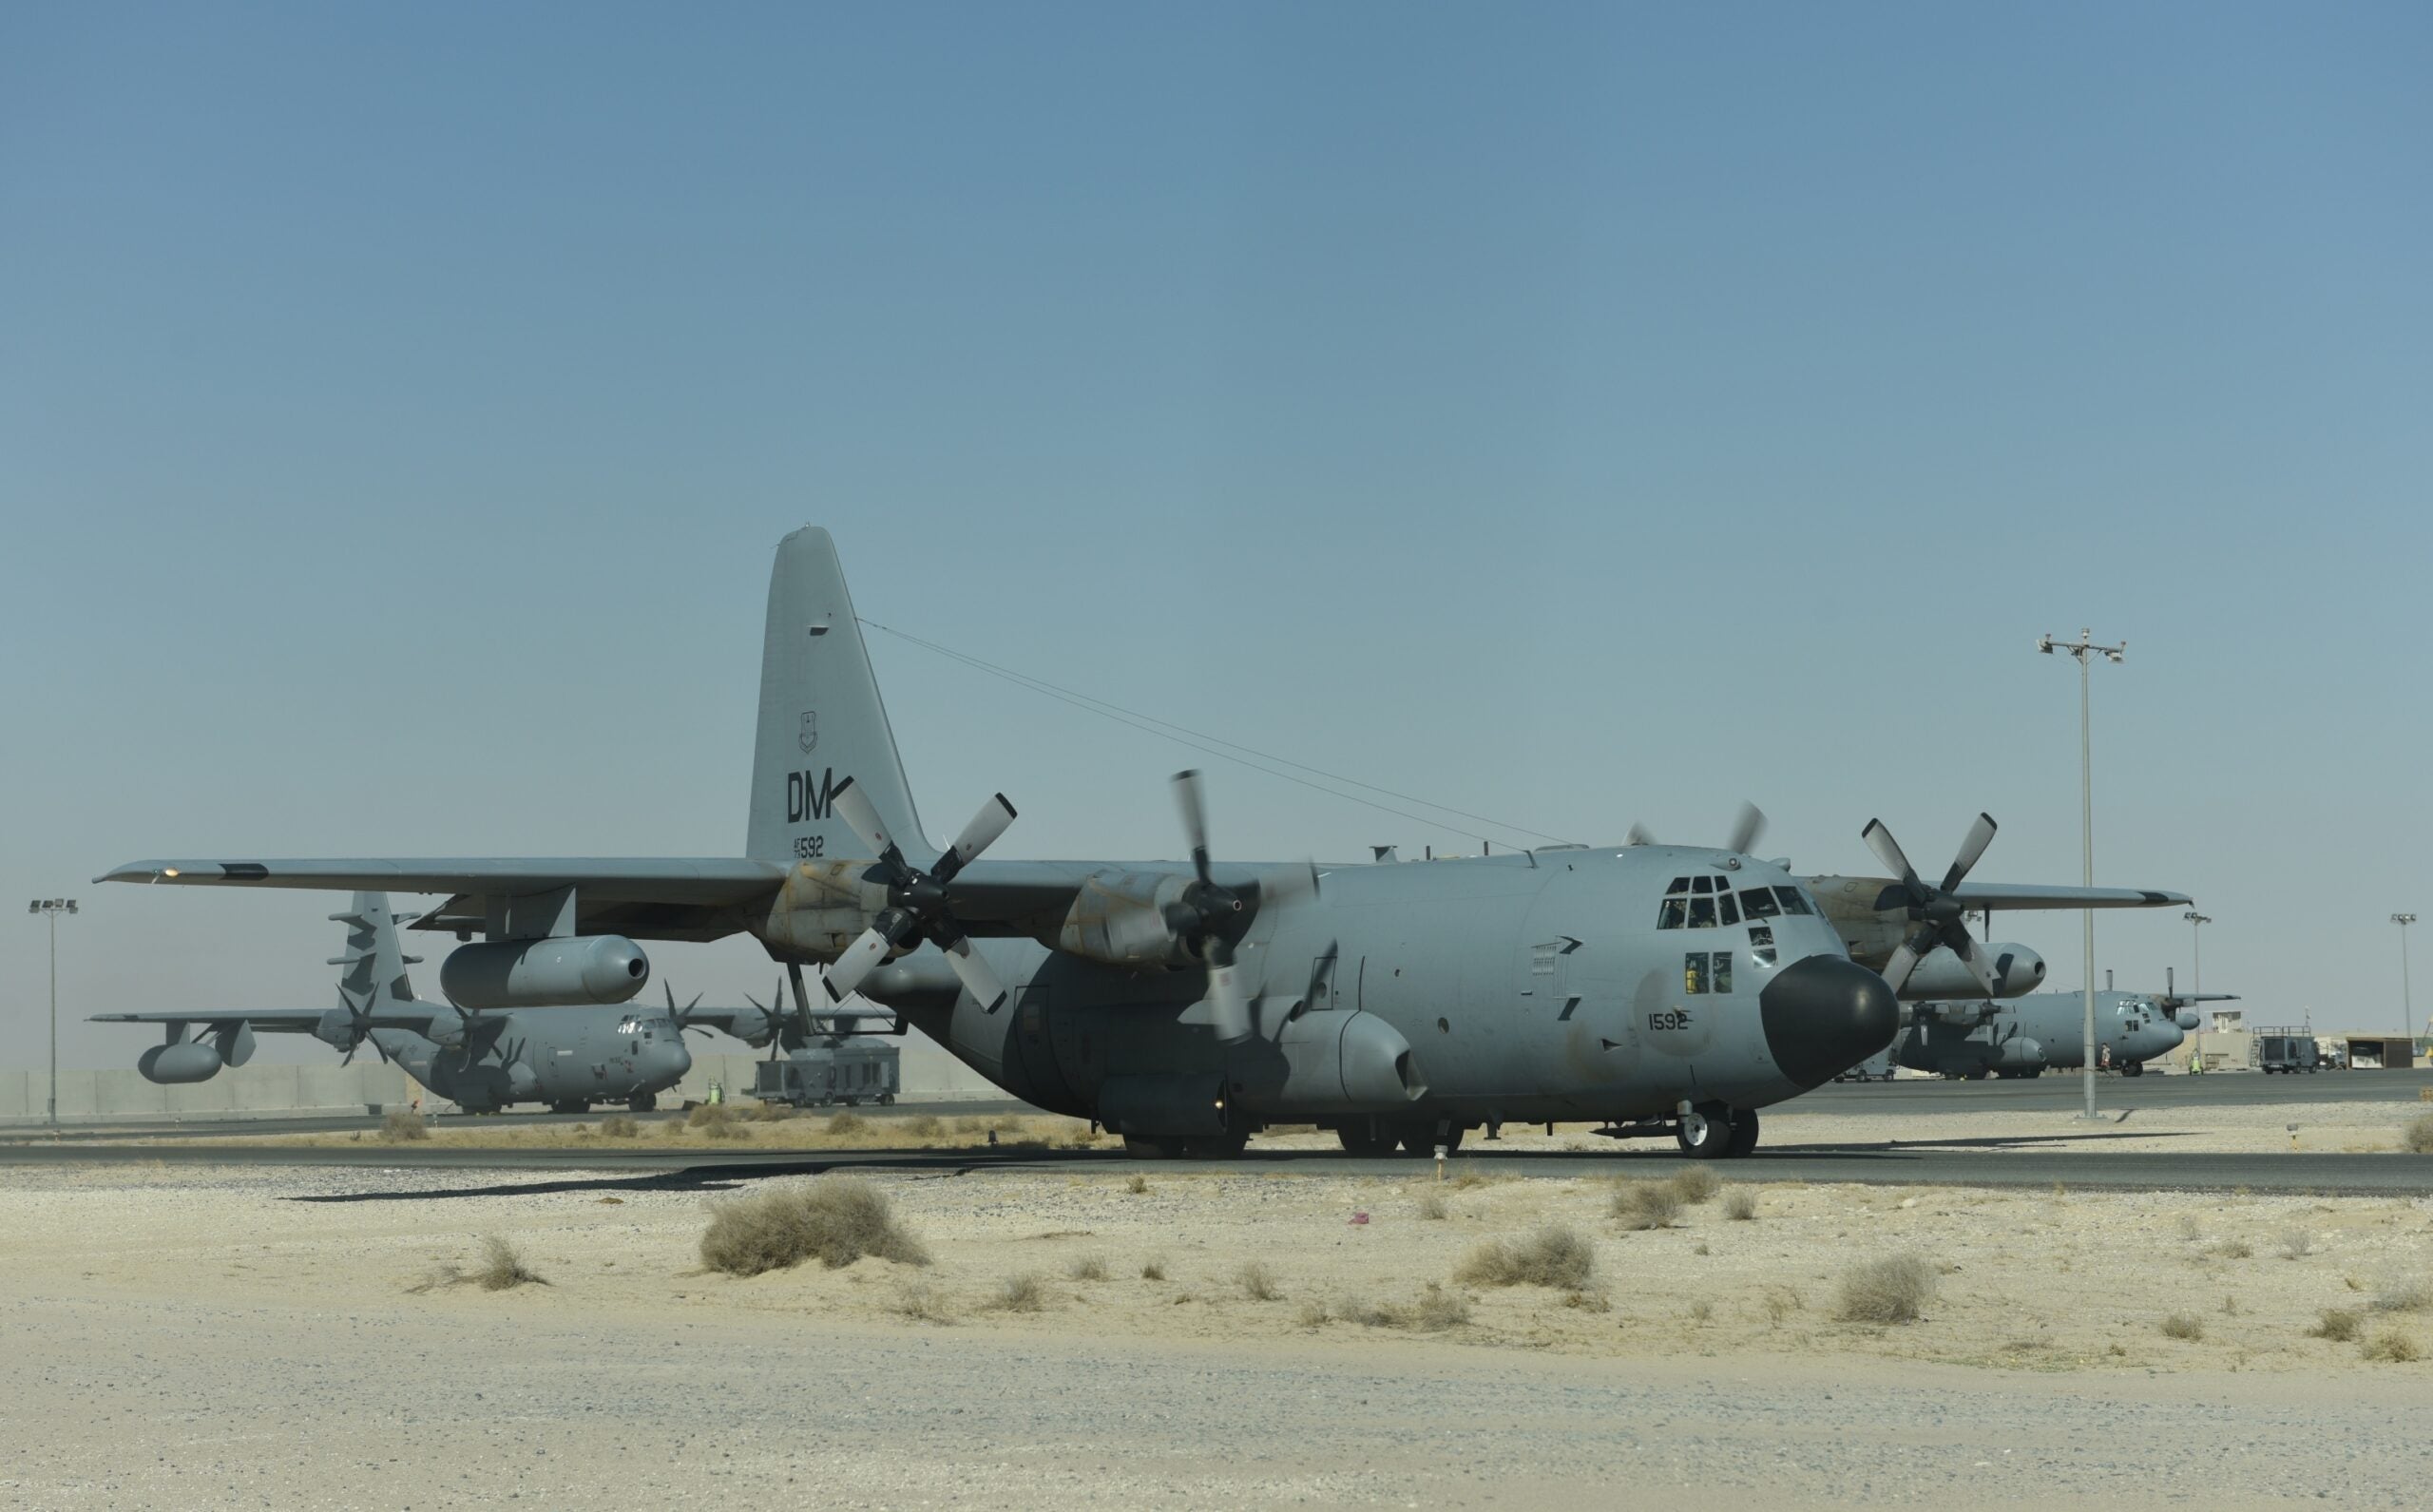 An EC-130H Compass Call travels along the taxiway at an undisclosed location in Southwest Asia, June 27, 2017. Compass Call is an airborne tactical weapon system that uses noise jamming to disrupt enemy command and control communications and deny time-critical adversary coordination essential for enemy force management. (U.S. Air Force photo by Tech. Sgt. Jonathan Hehnly)